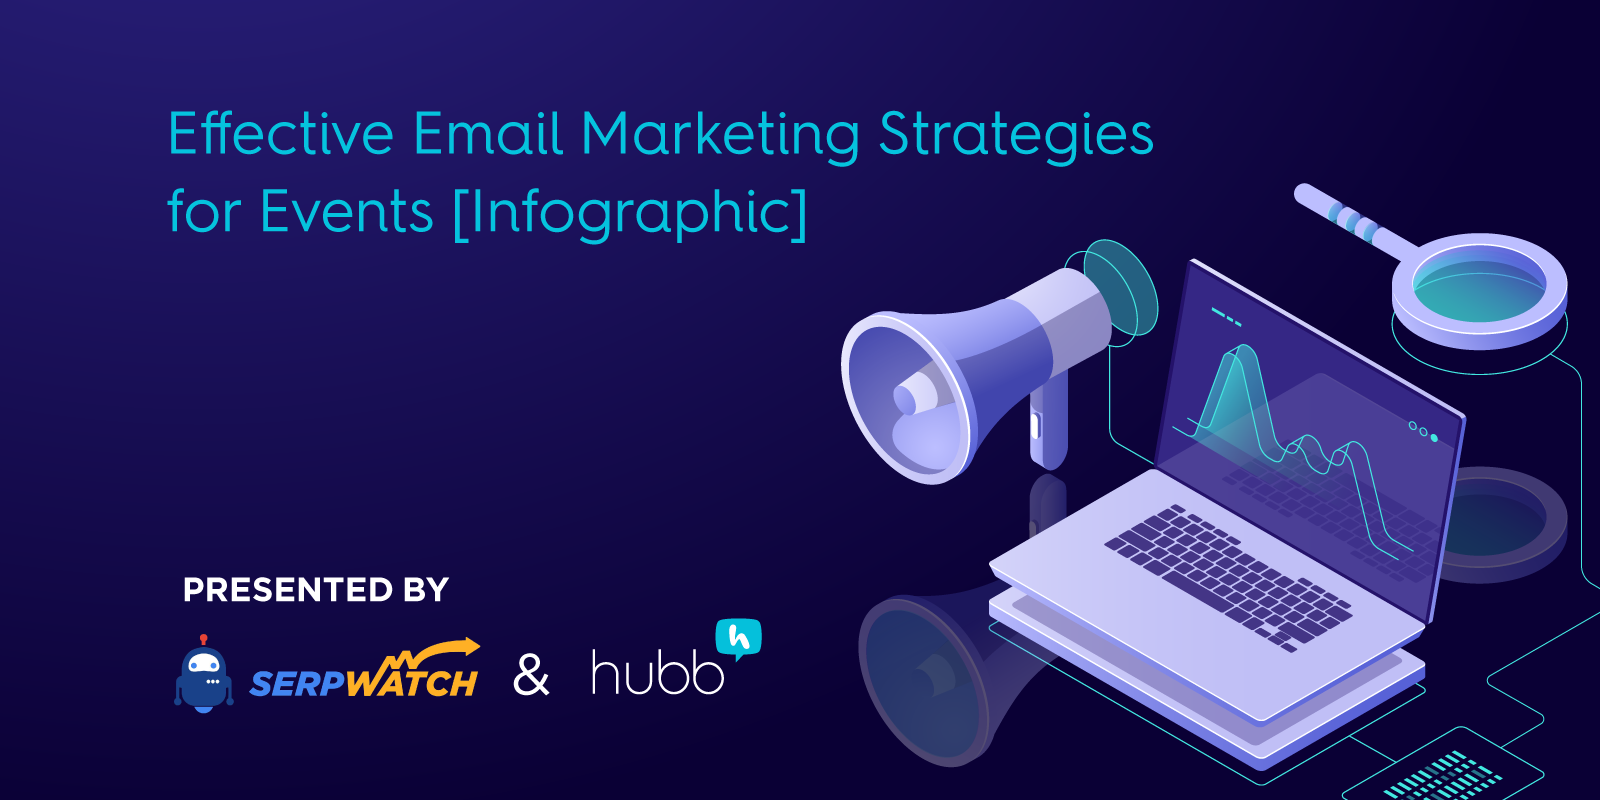 Effective Email Marketing Strategies for Events [Infographic]